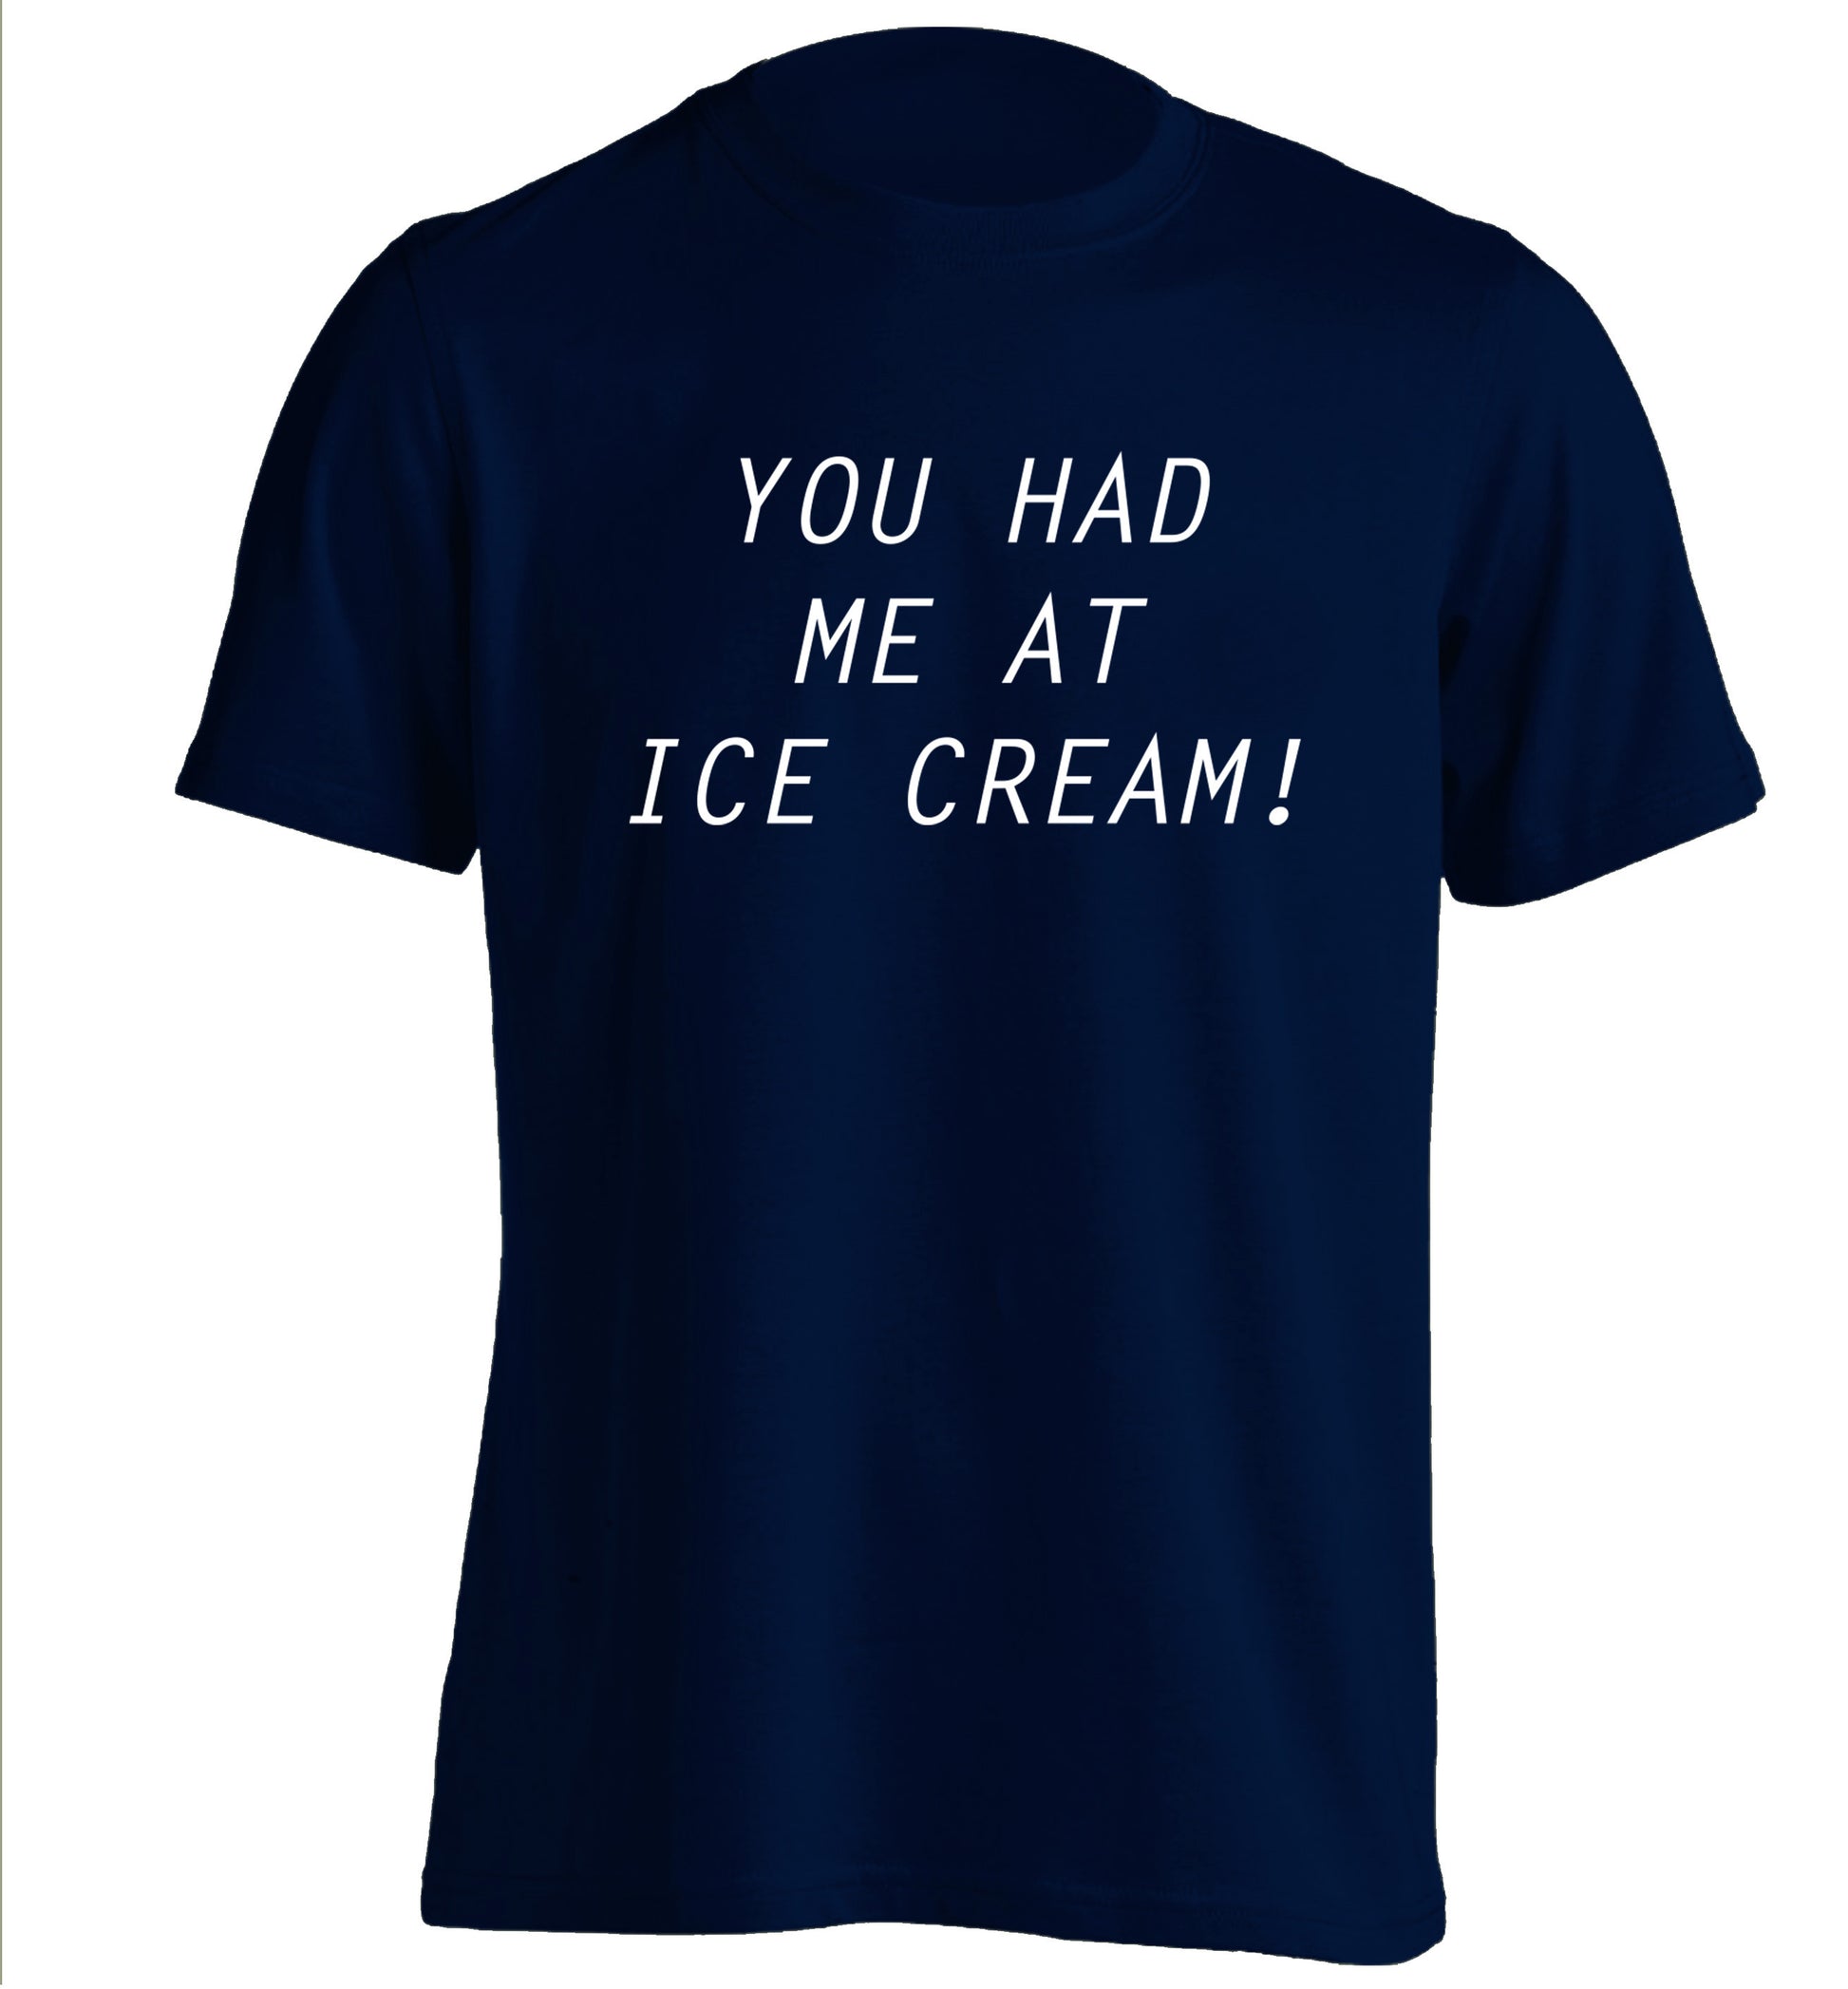 You had me at ice cream adults unisex navy Tshirt 2XL